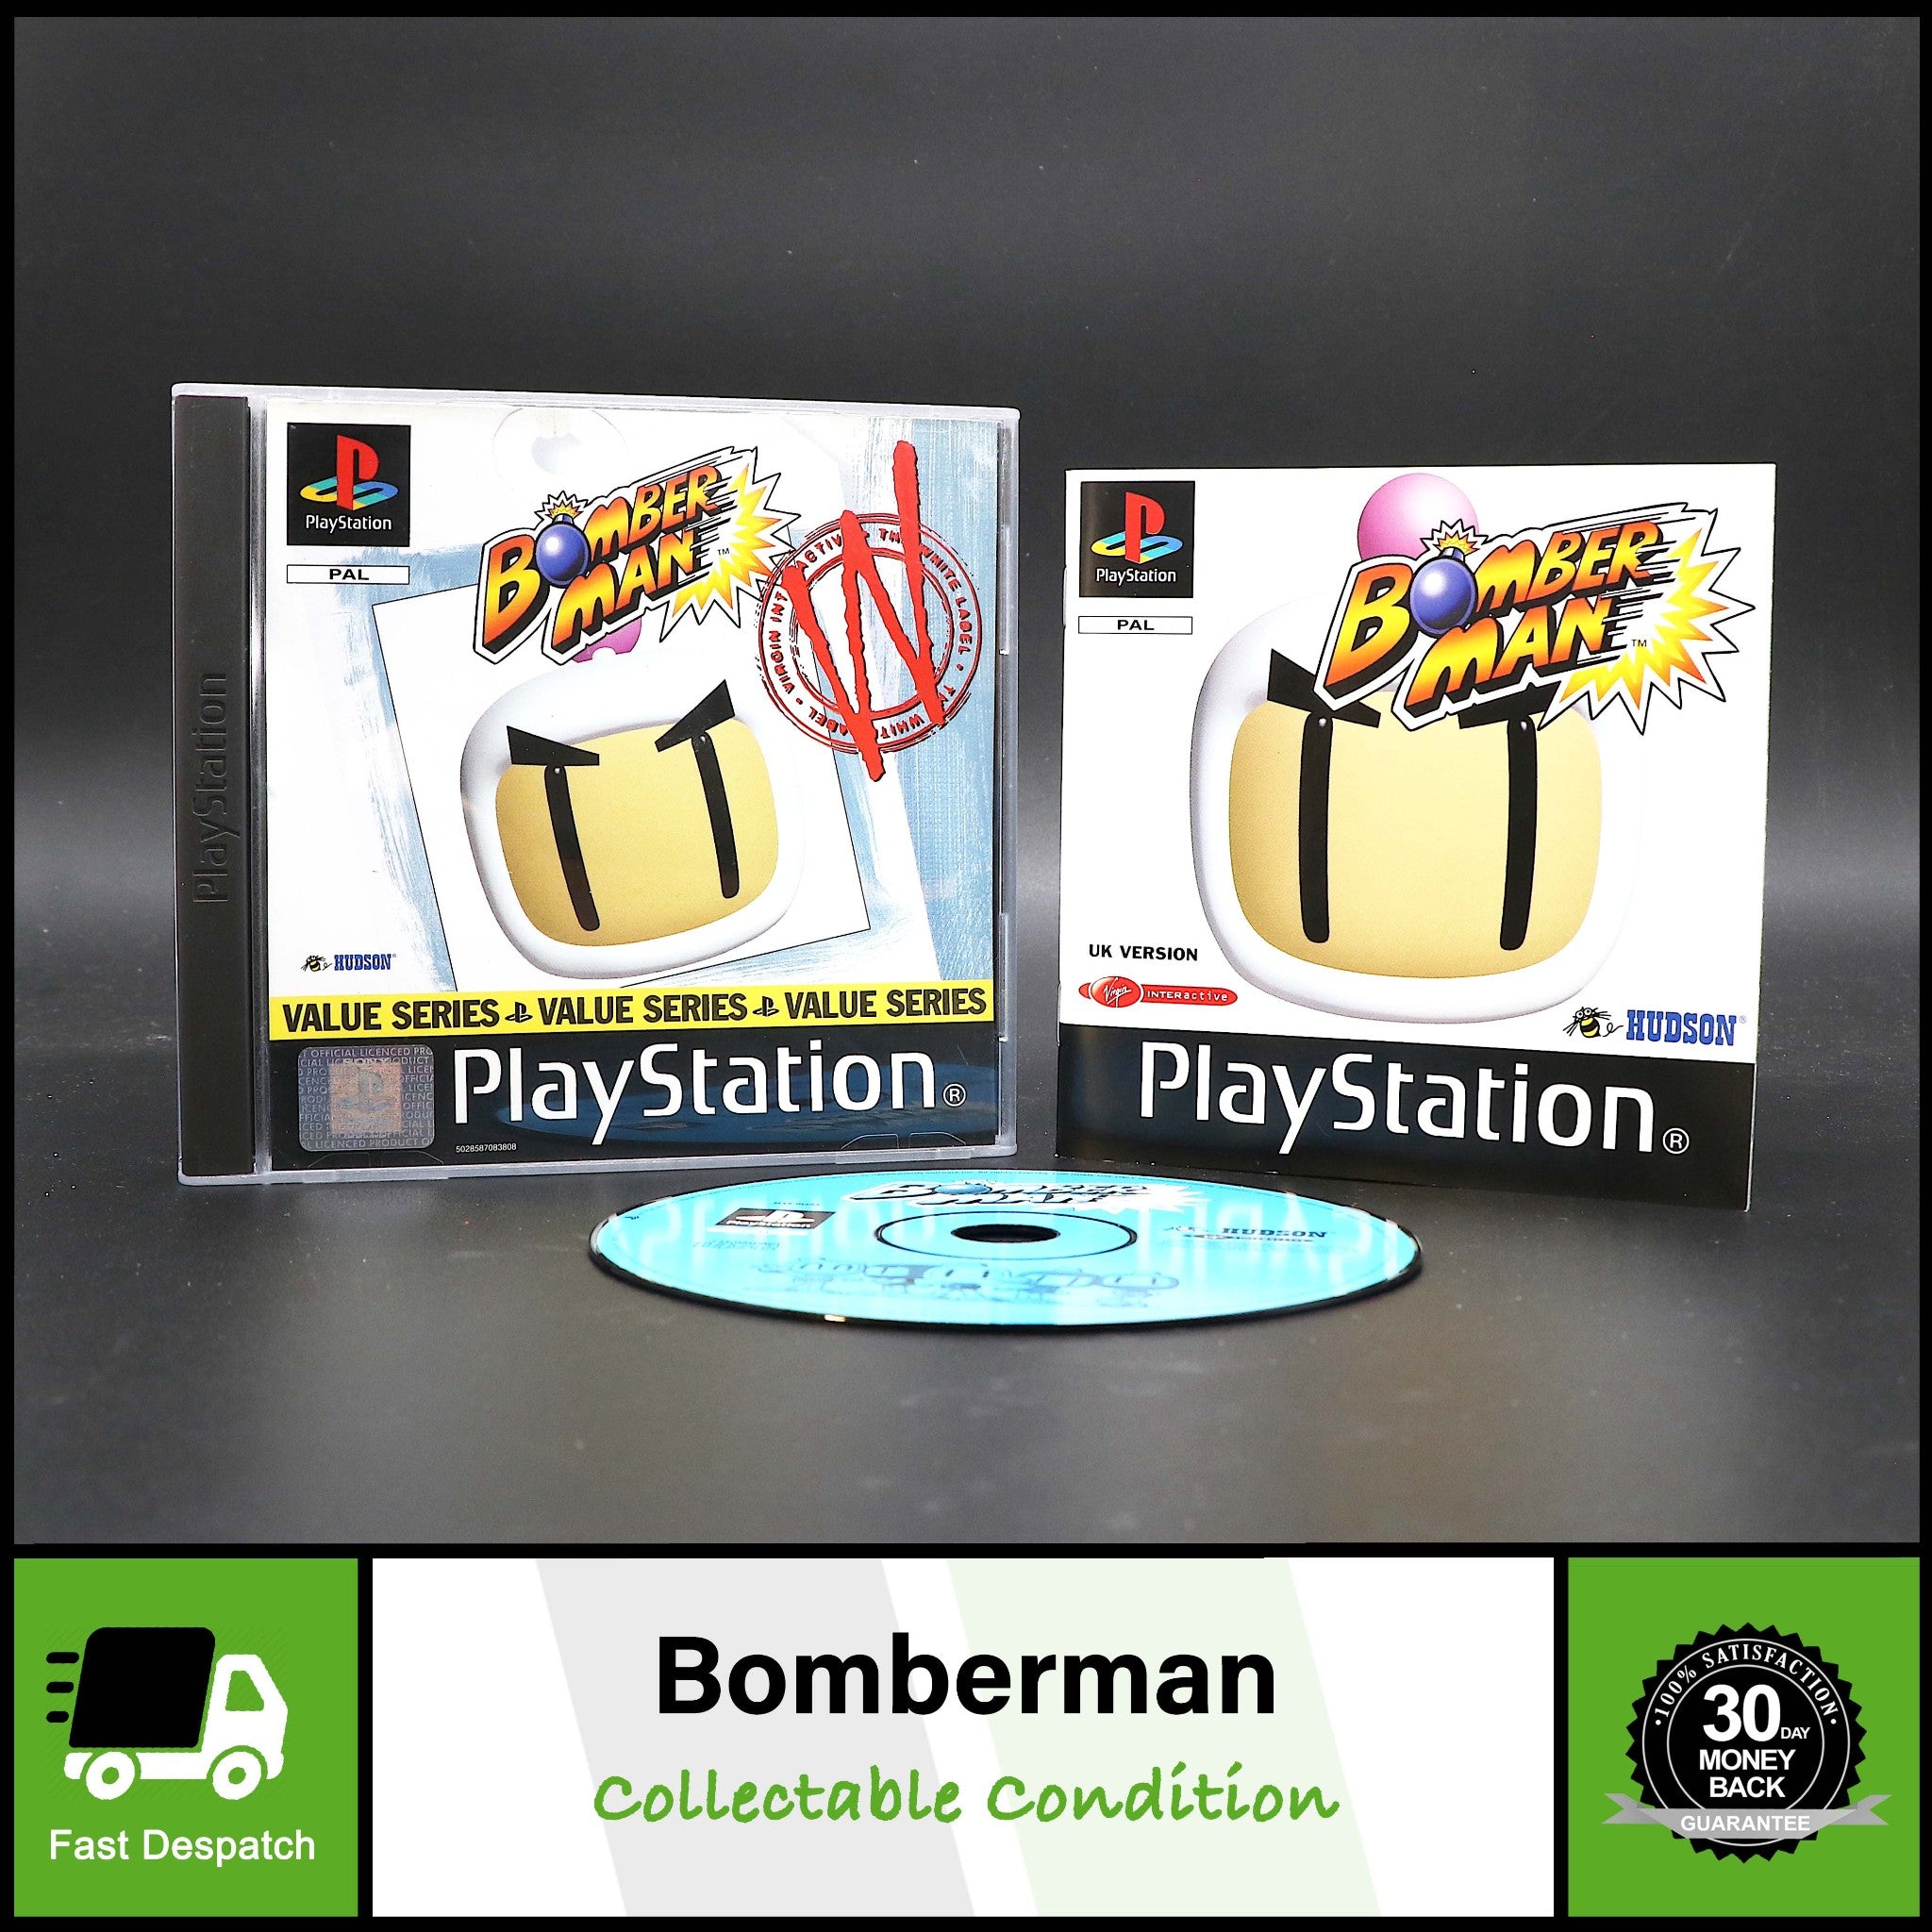 Bomberman - Sony Playstation PSONE PS1 Game - Collectable Condition!